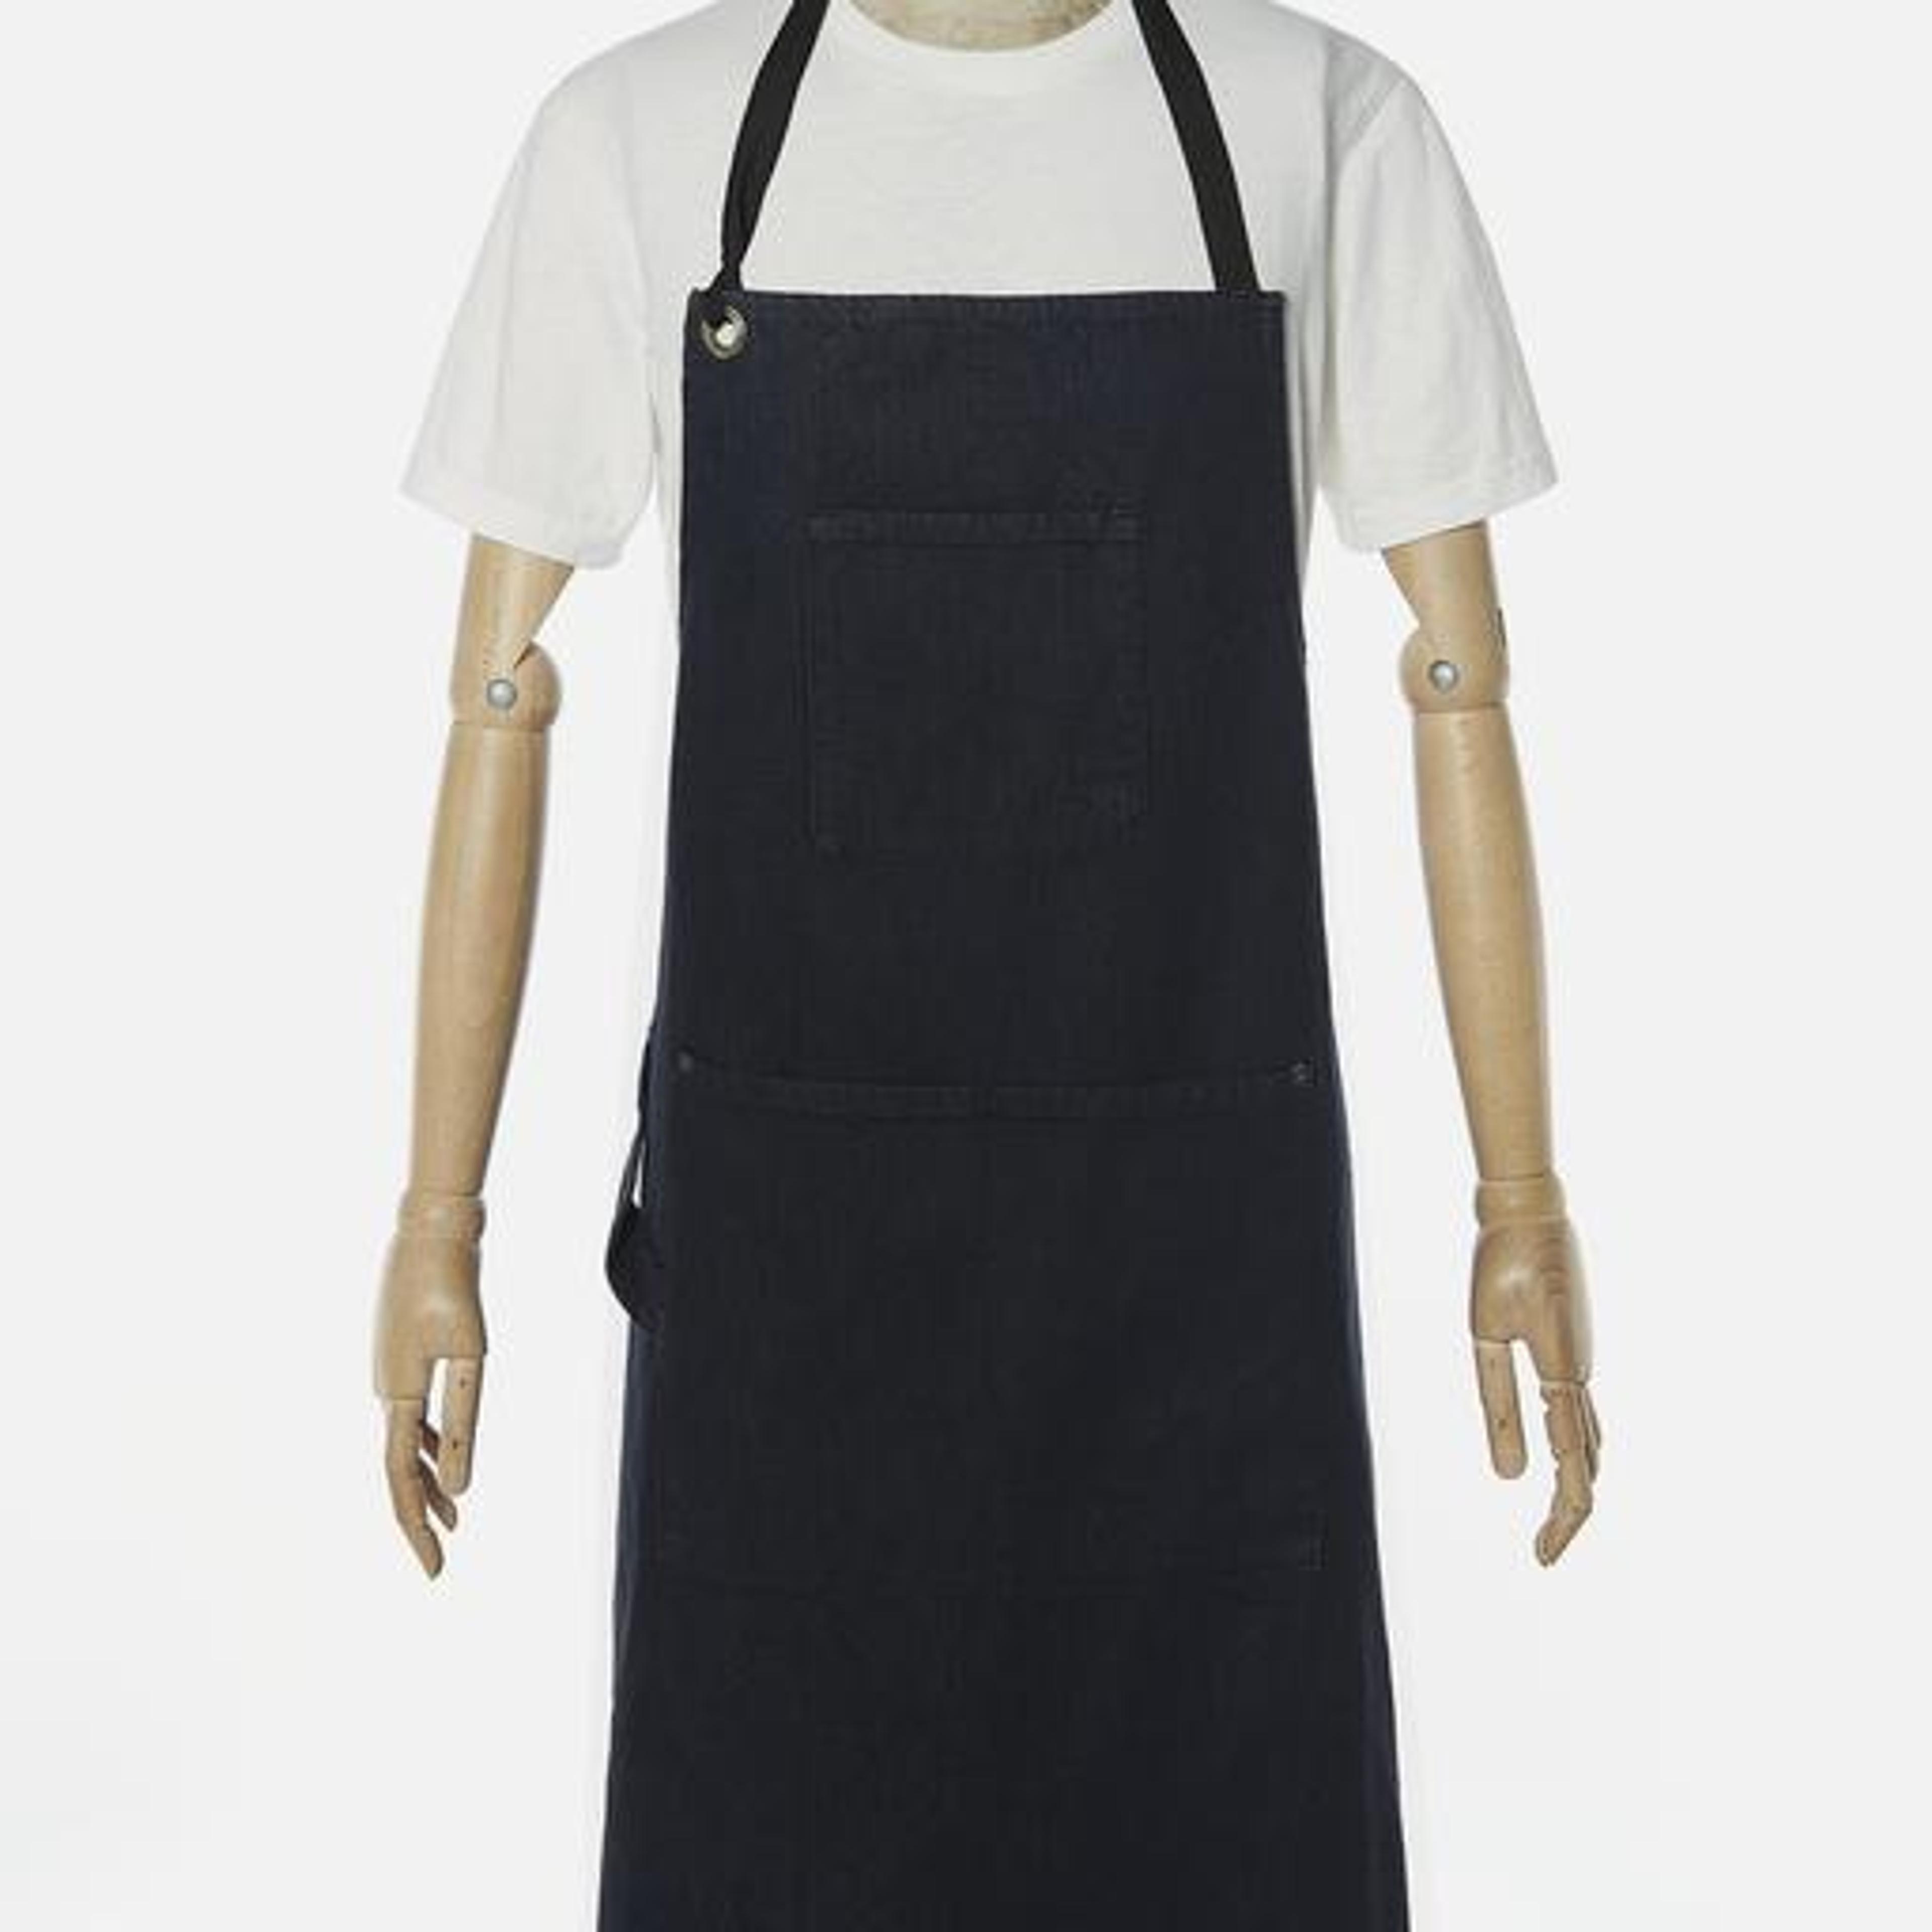 universalworks.co.uk/products/universal-works-apron-in-black-selvedge-denim